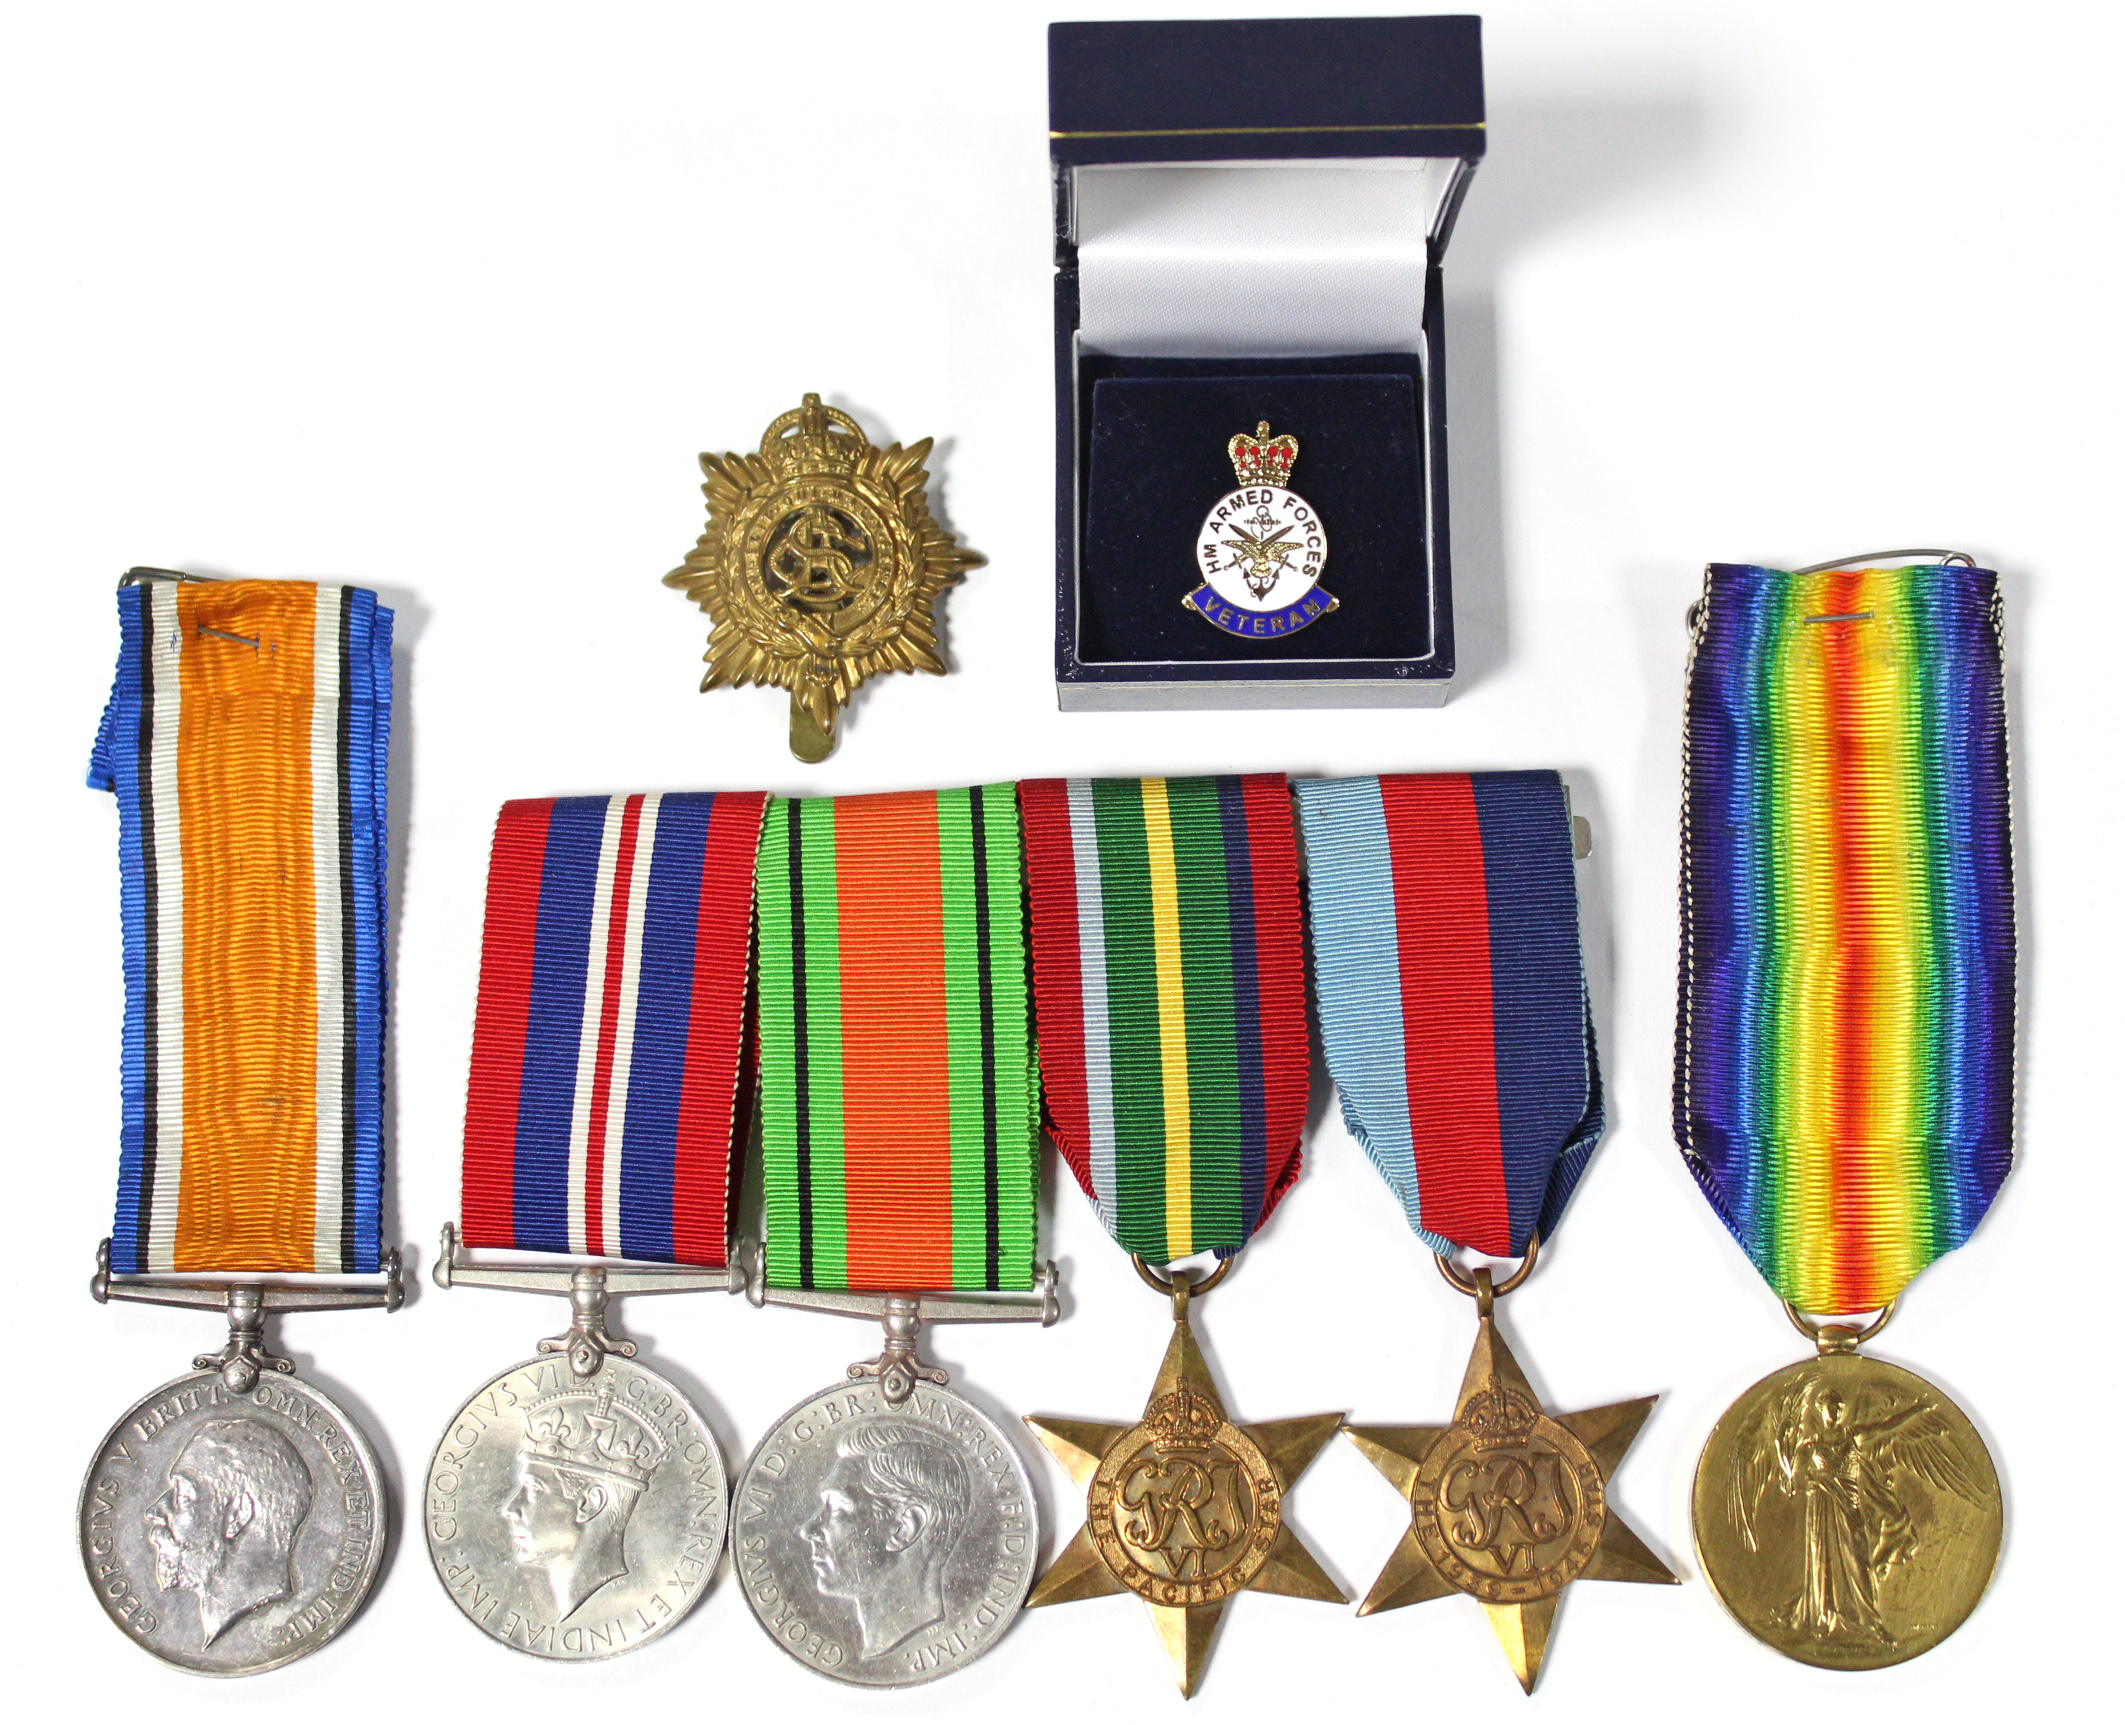 A WWI pair: British War Medal & Victory Medal, awarded to Pte. G. H. Riddle, ASC., mounted for